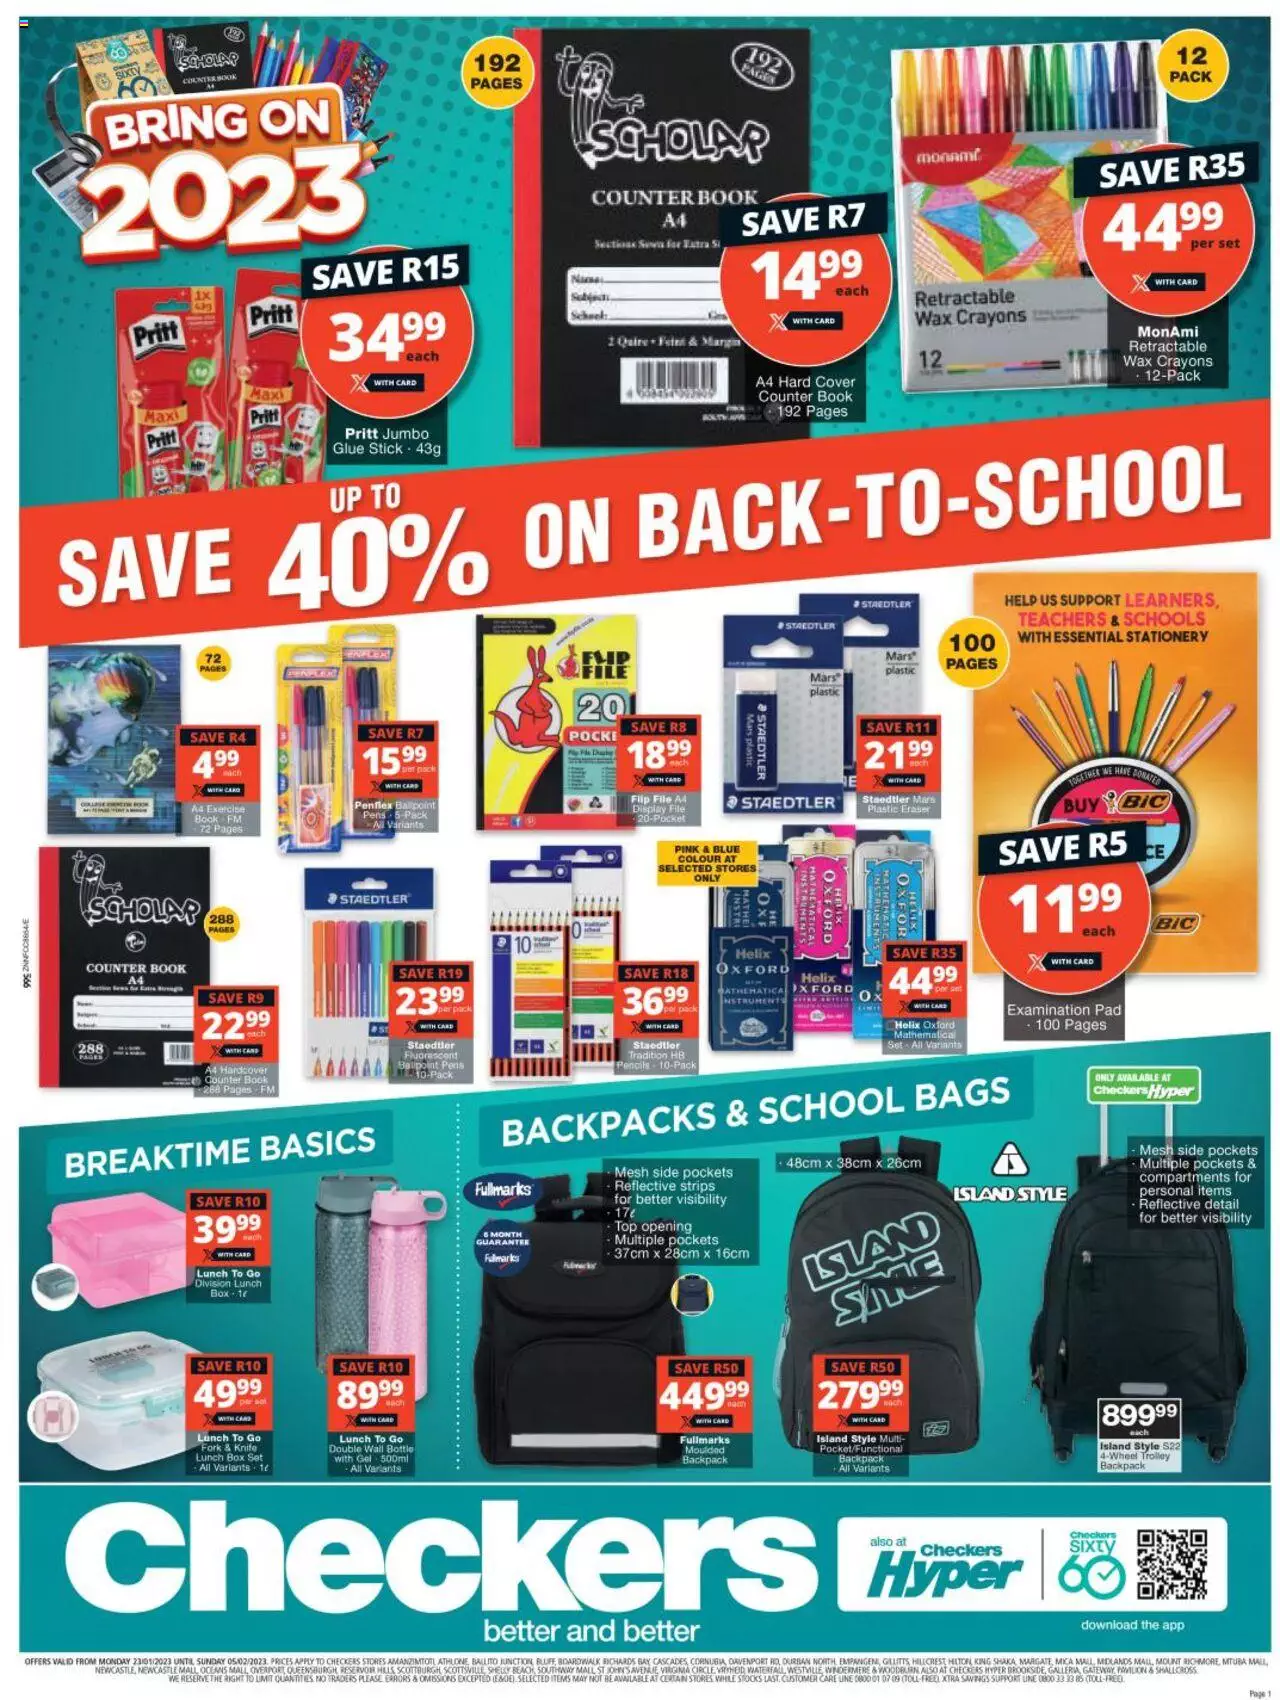 Checkers Specials Back to School Jan 2023